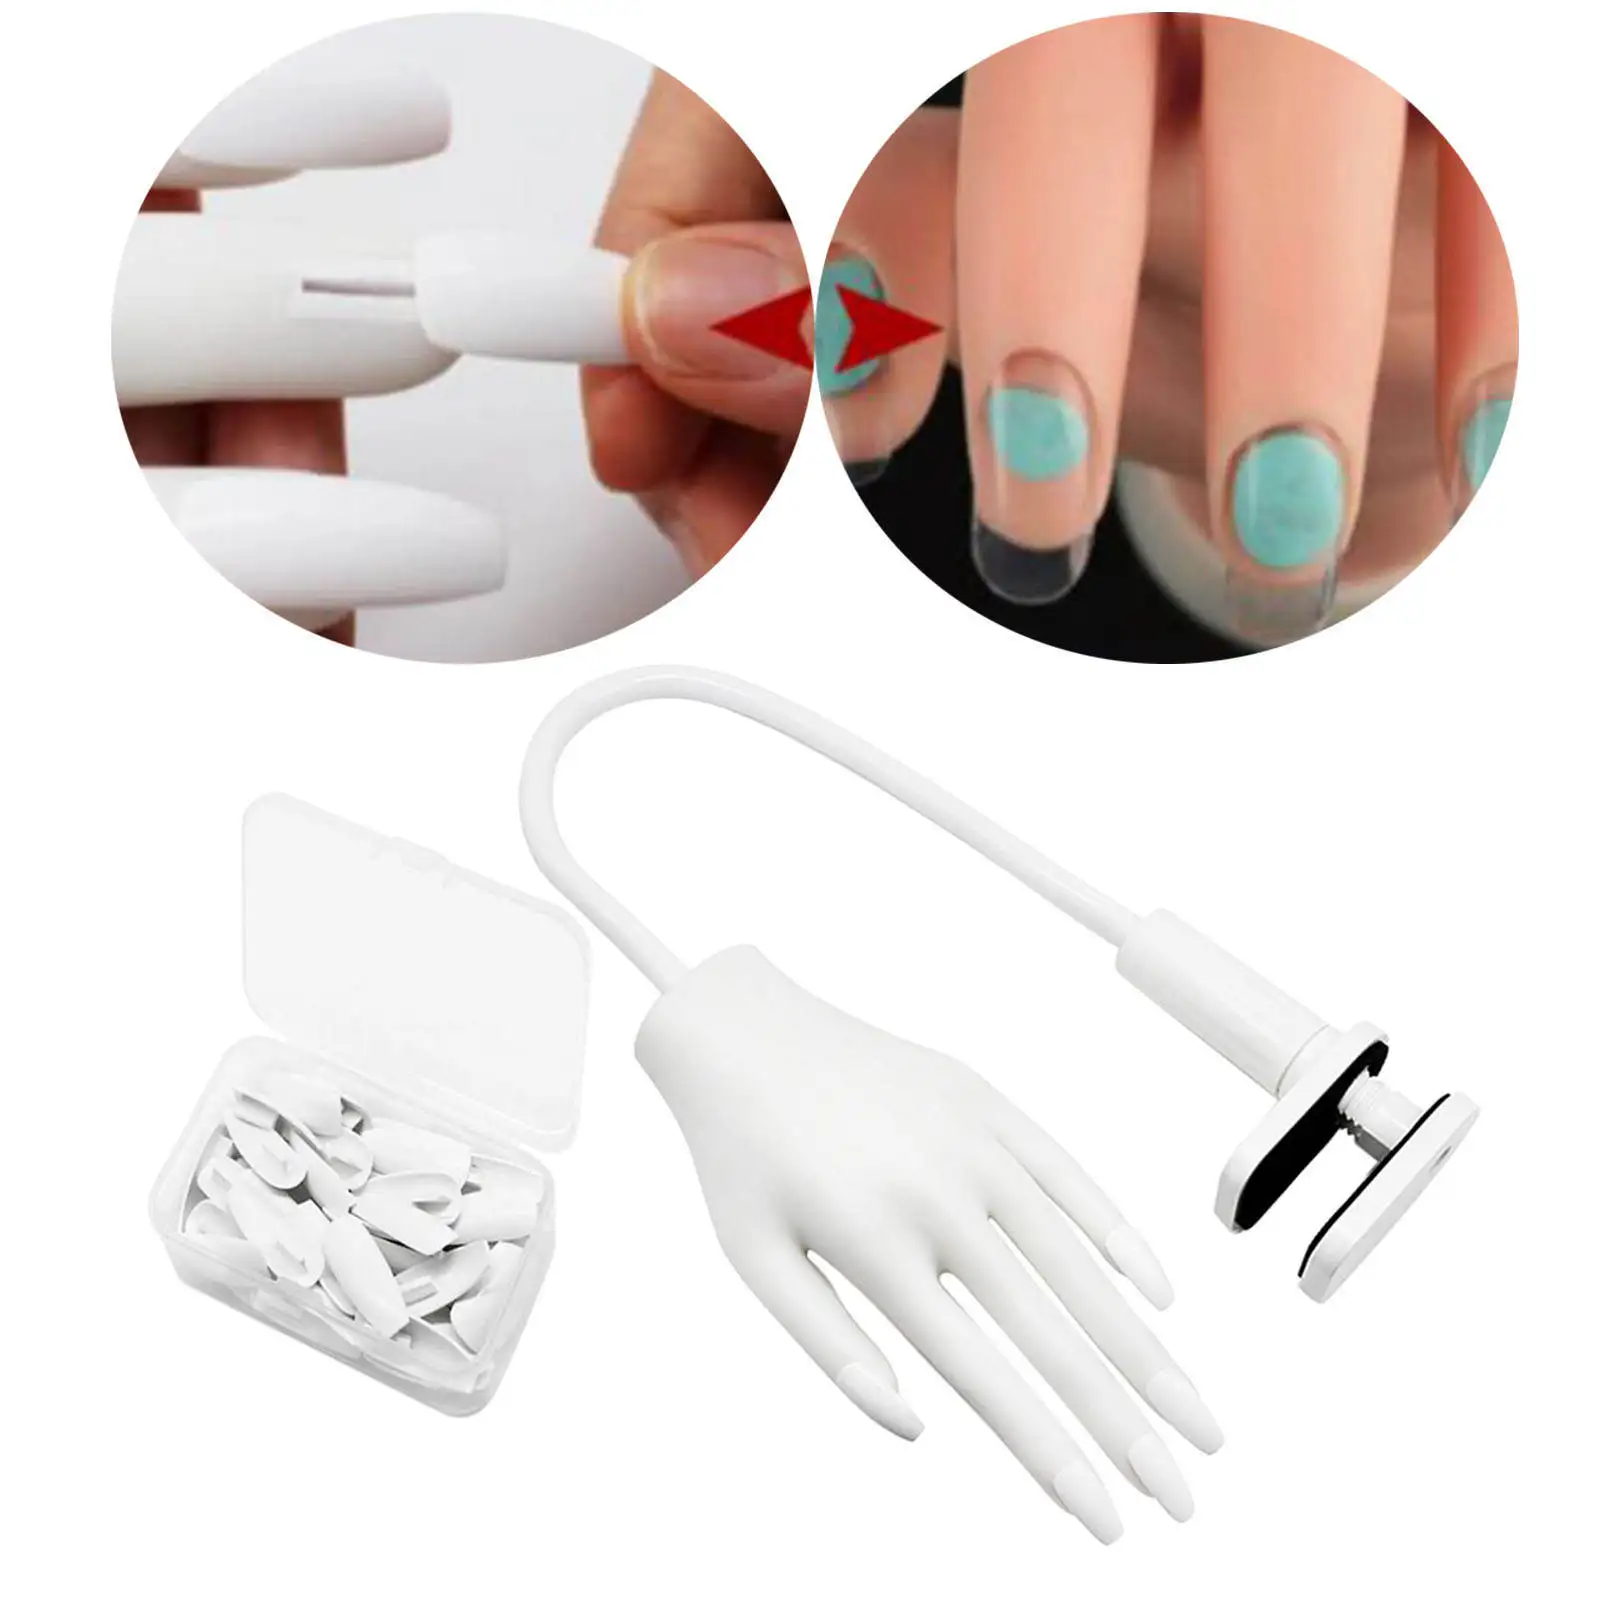 Nail Practice Hand Fake Model Hands for Nails Practice Technician Manicure Supply Home Salon